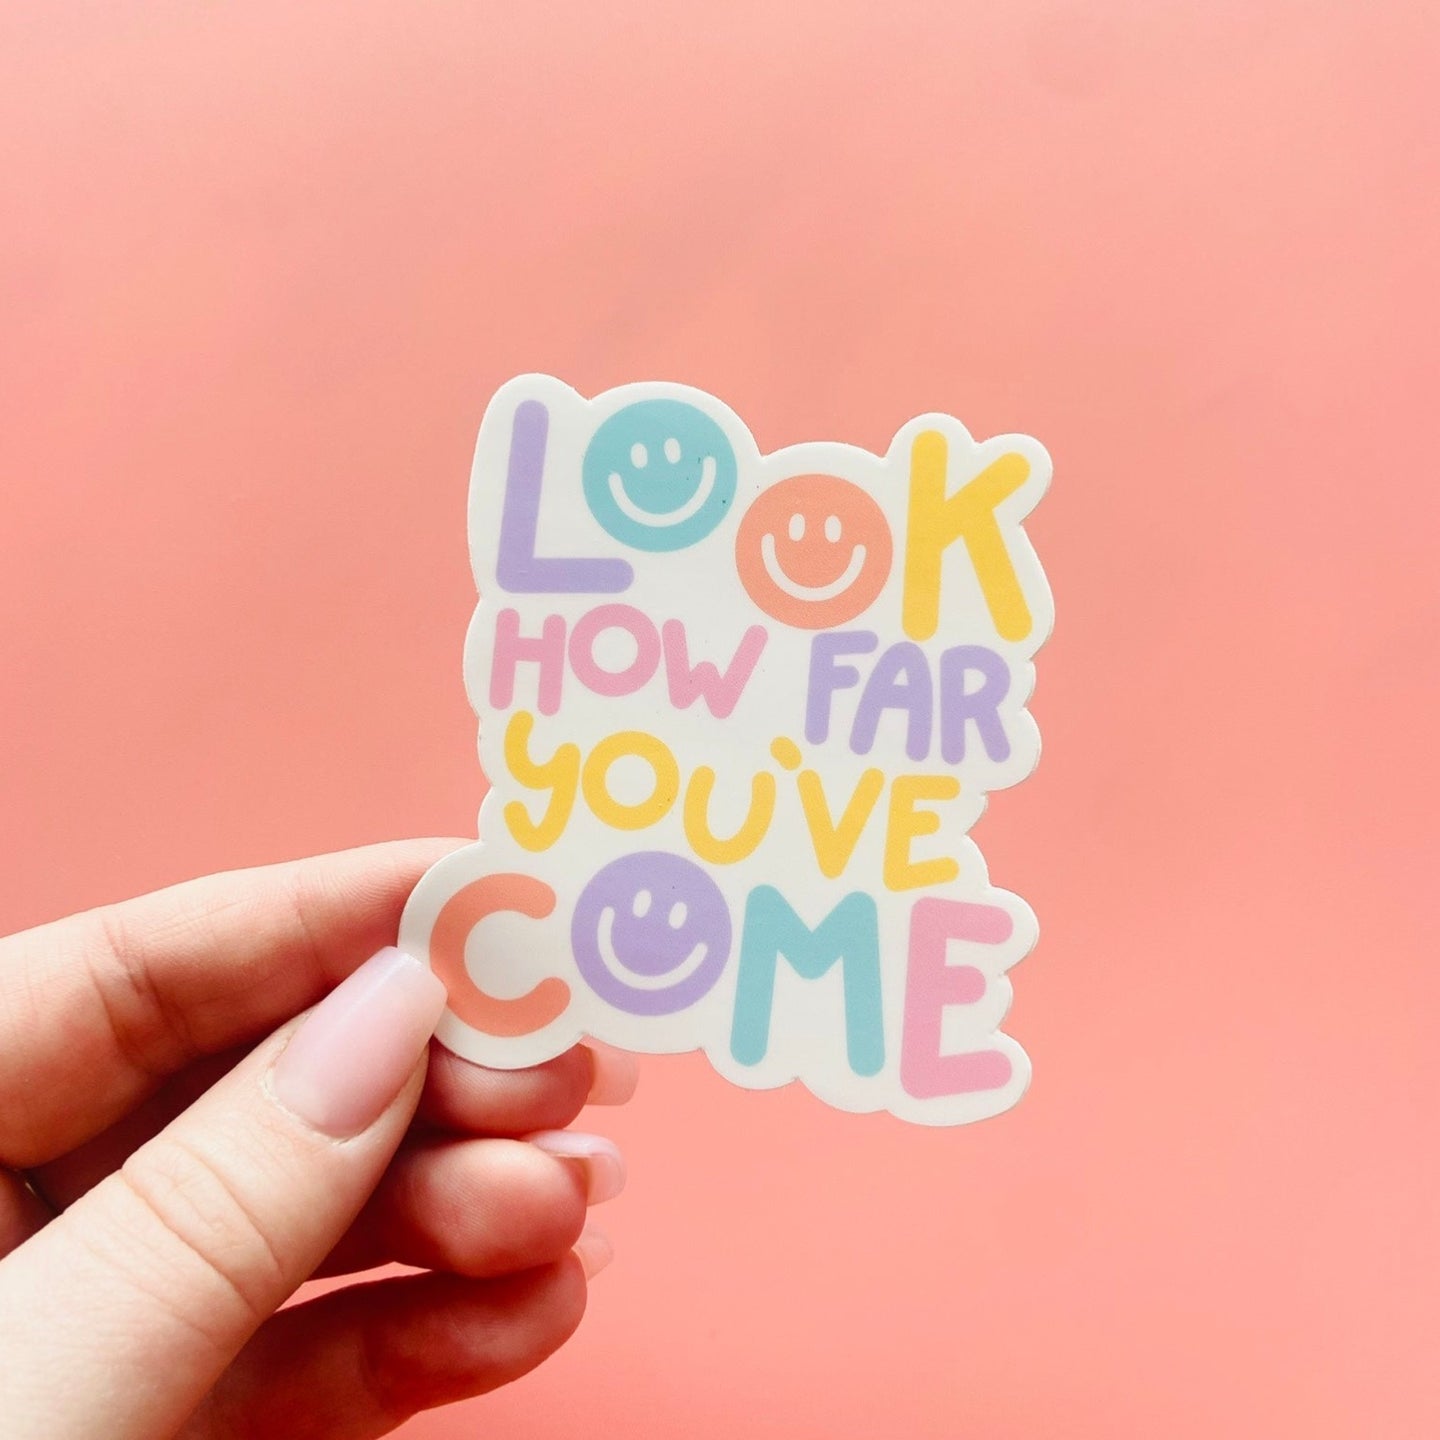 Look how far you’ve come - sticker